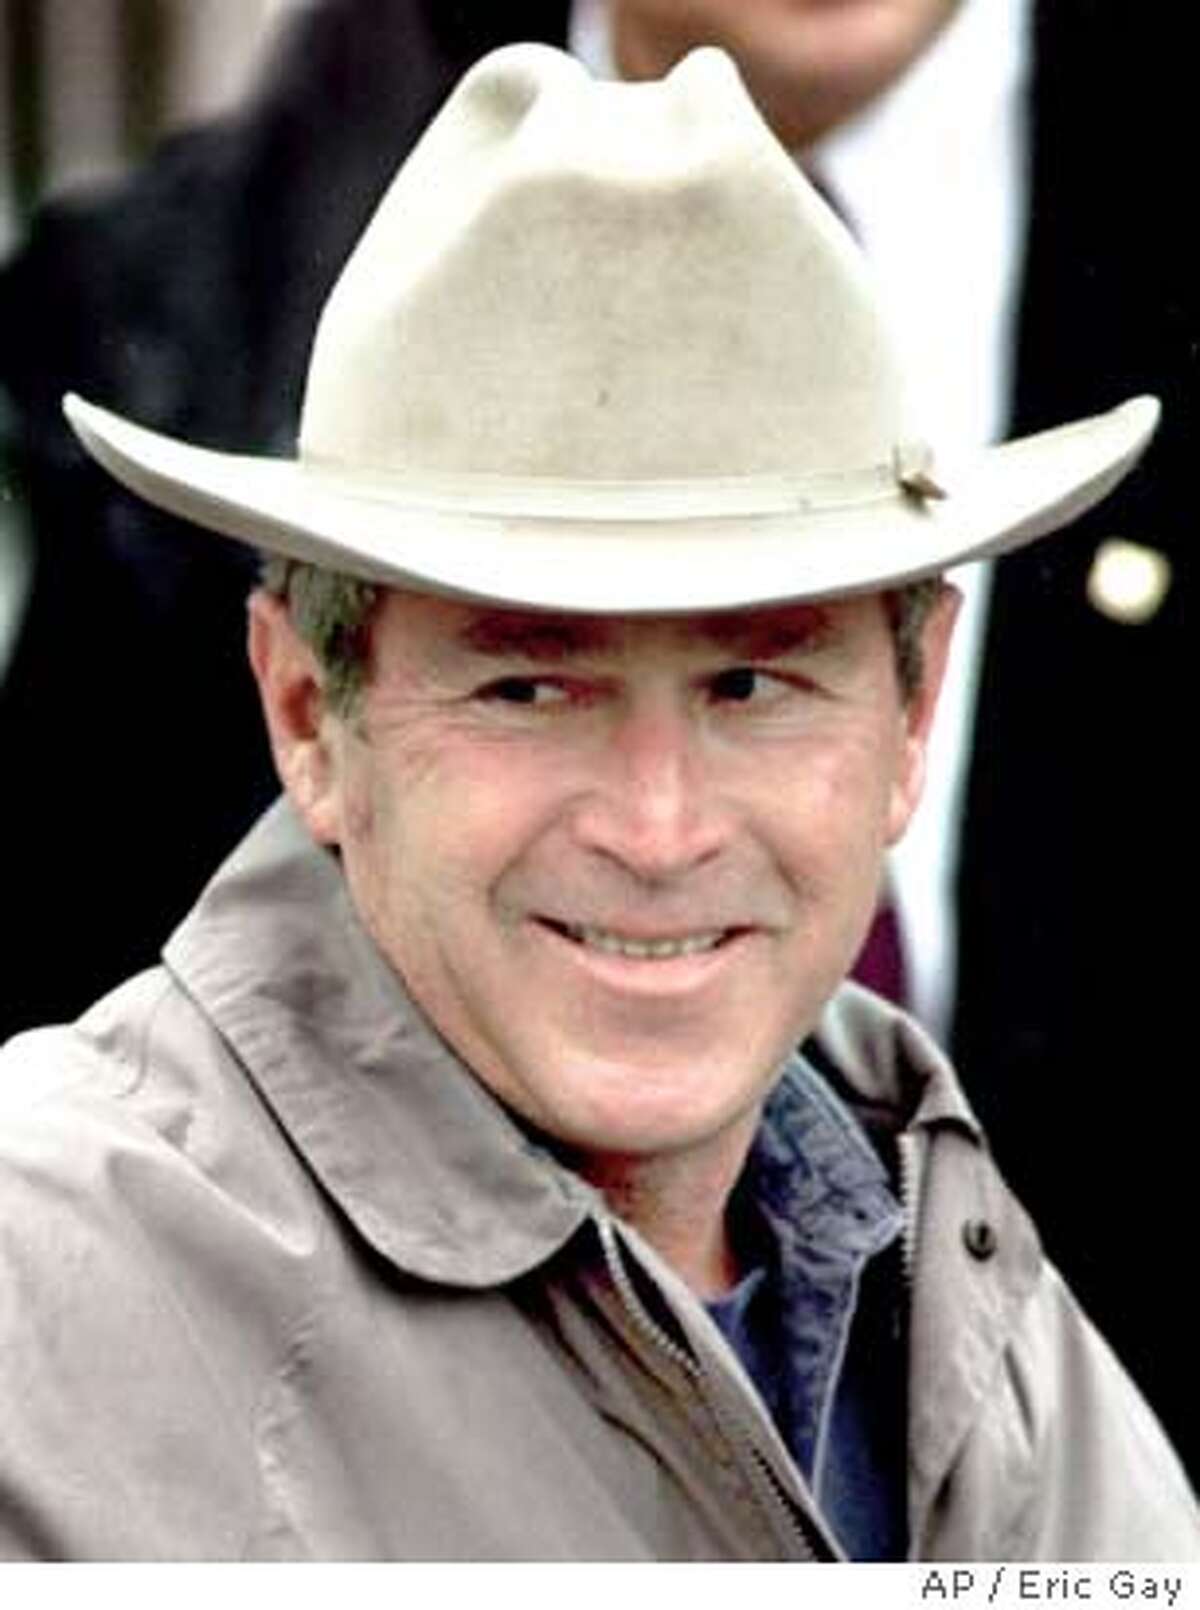 Then-governor George W. Bush arrives at the Texas governor's mansion in a photo from November, 2000. Associated Press photo by Eric Gay